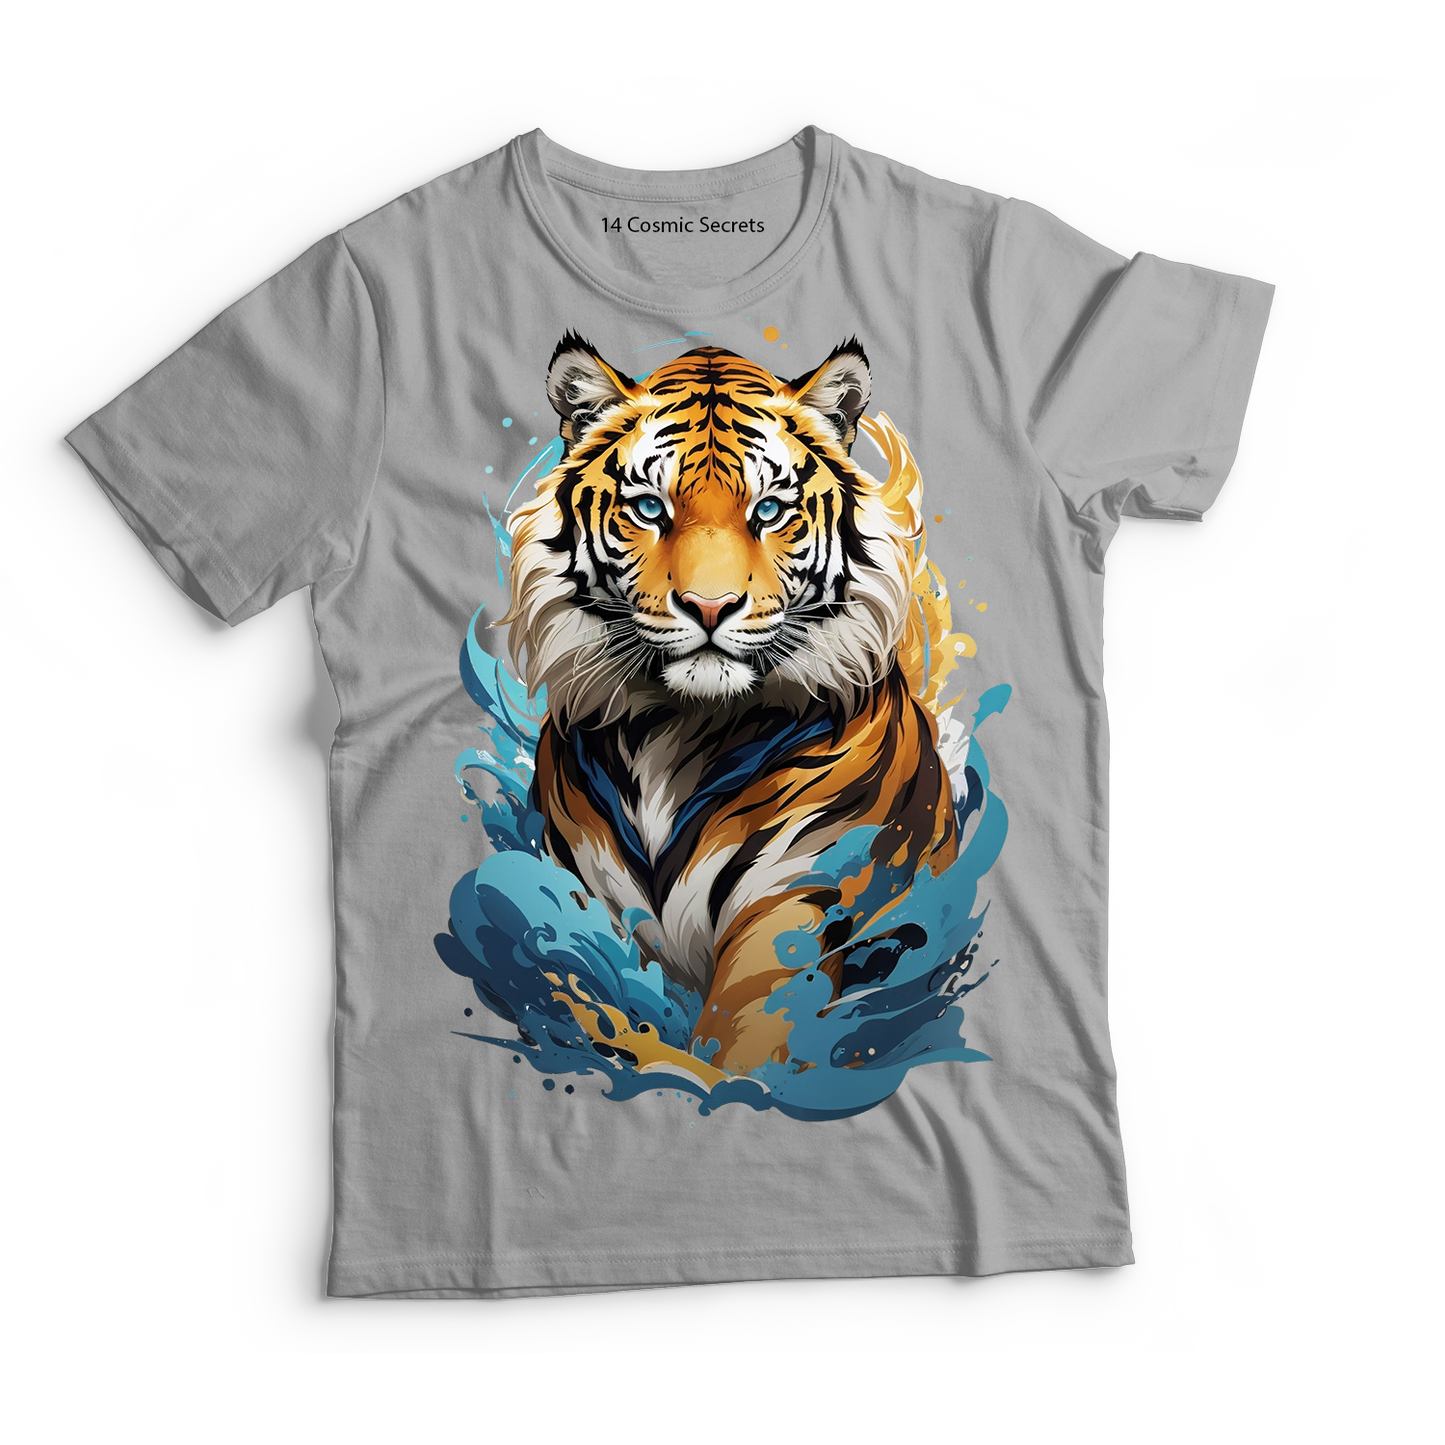 Bengal Stripes Statement Tee Graphic Printed T-Shirt  Cotton T-Shirt Magnificence of India T-Shirt